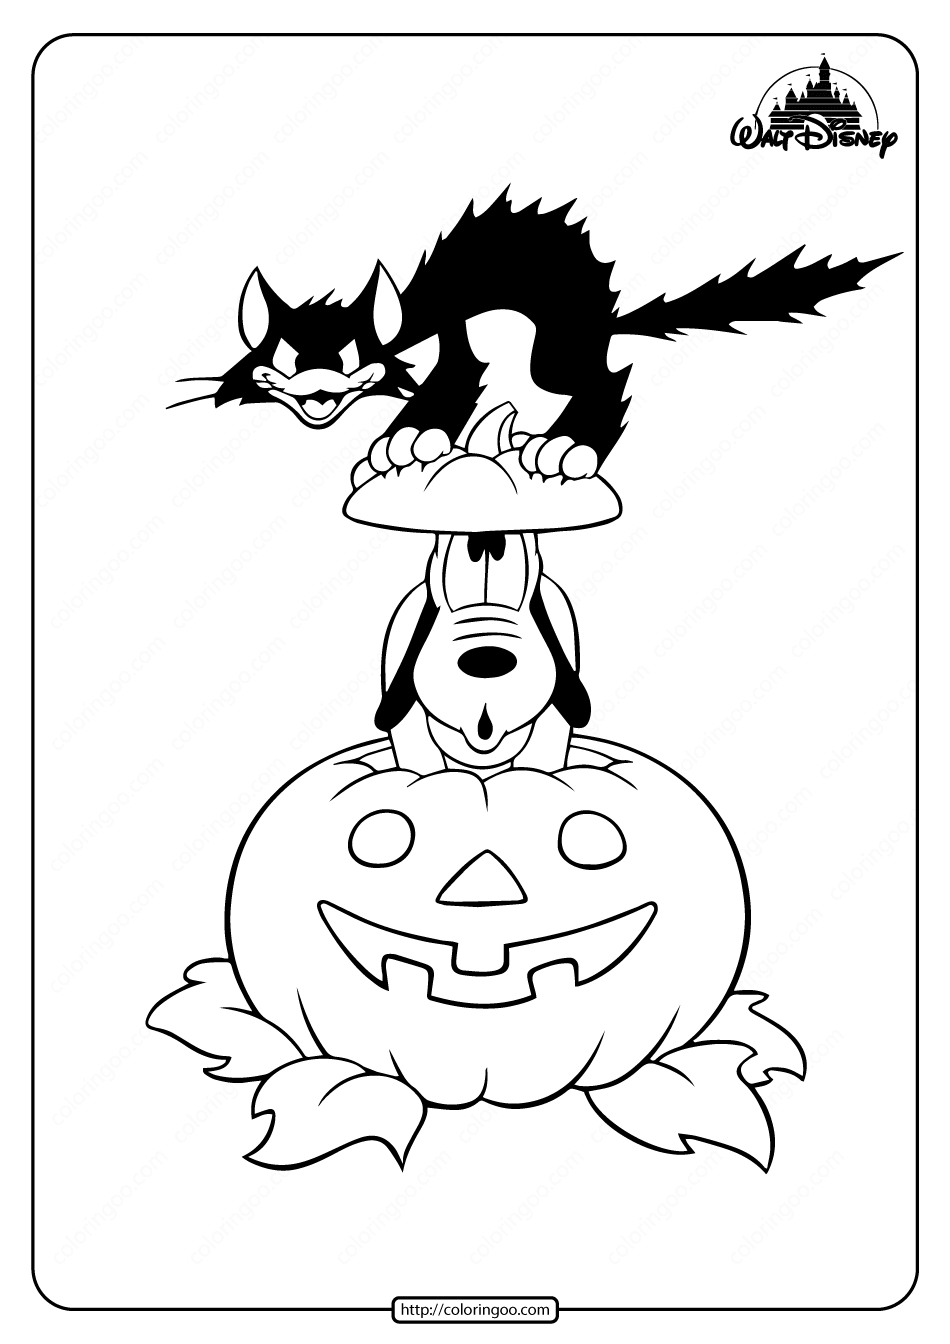 disney pluto halloween coloring pages